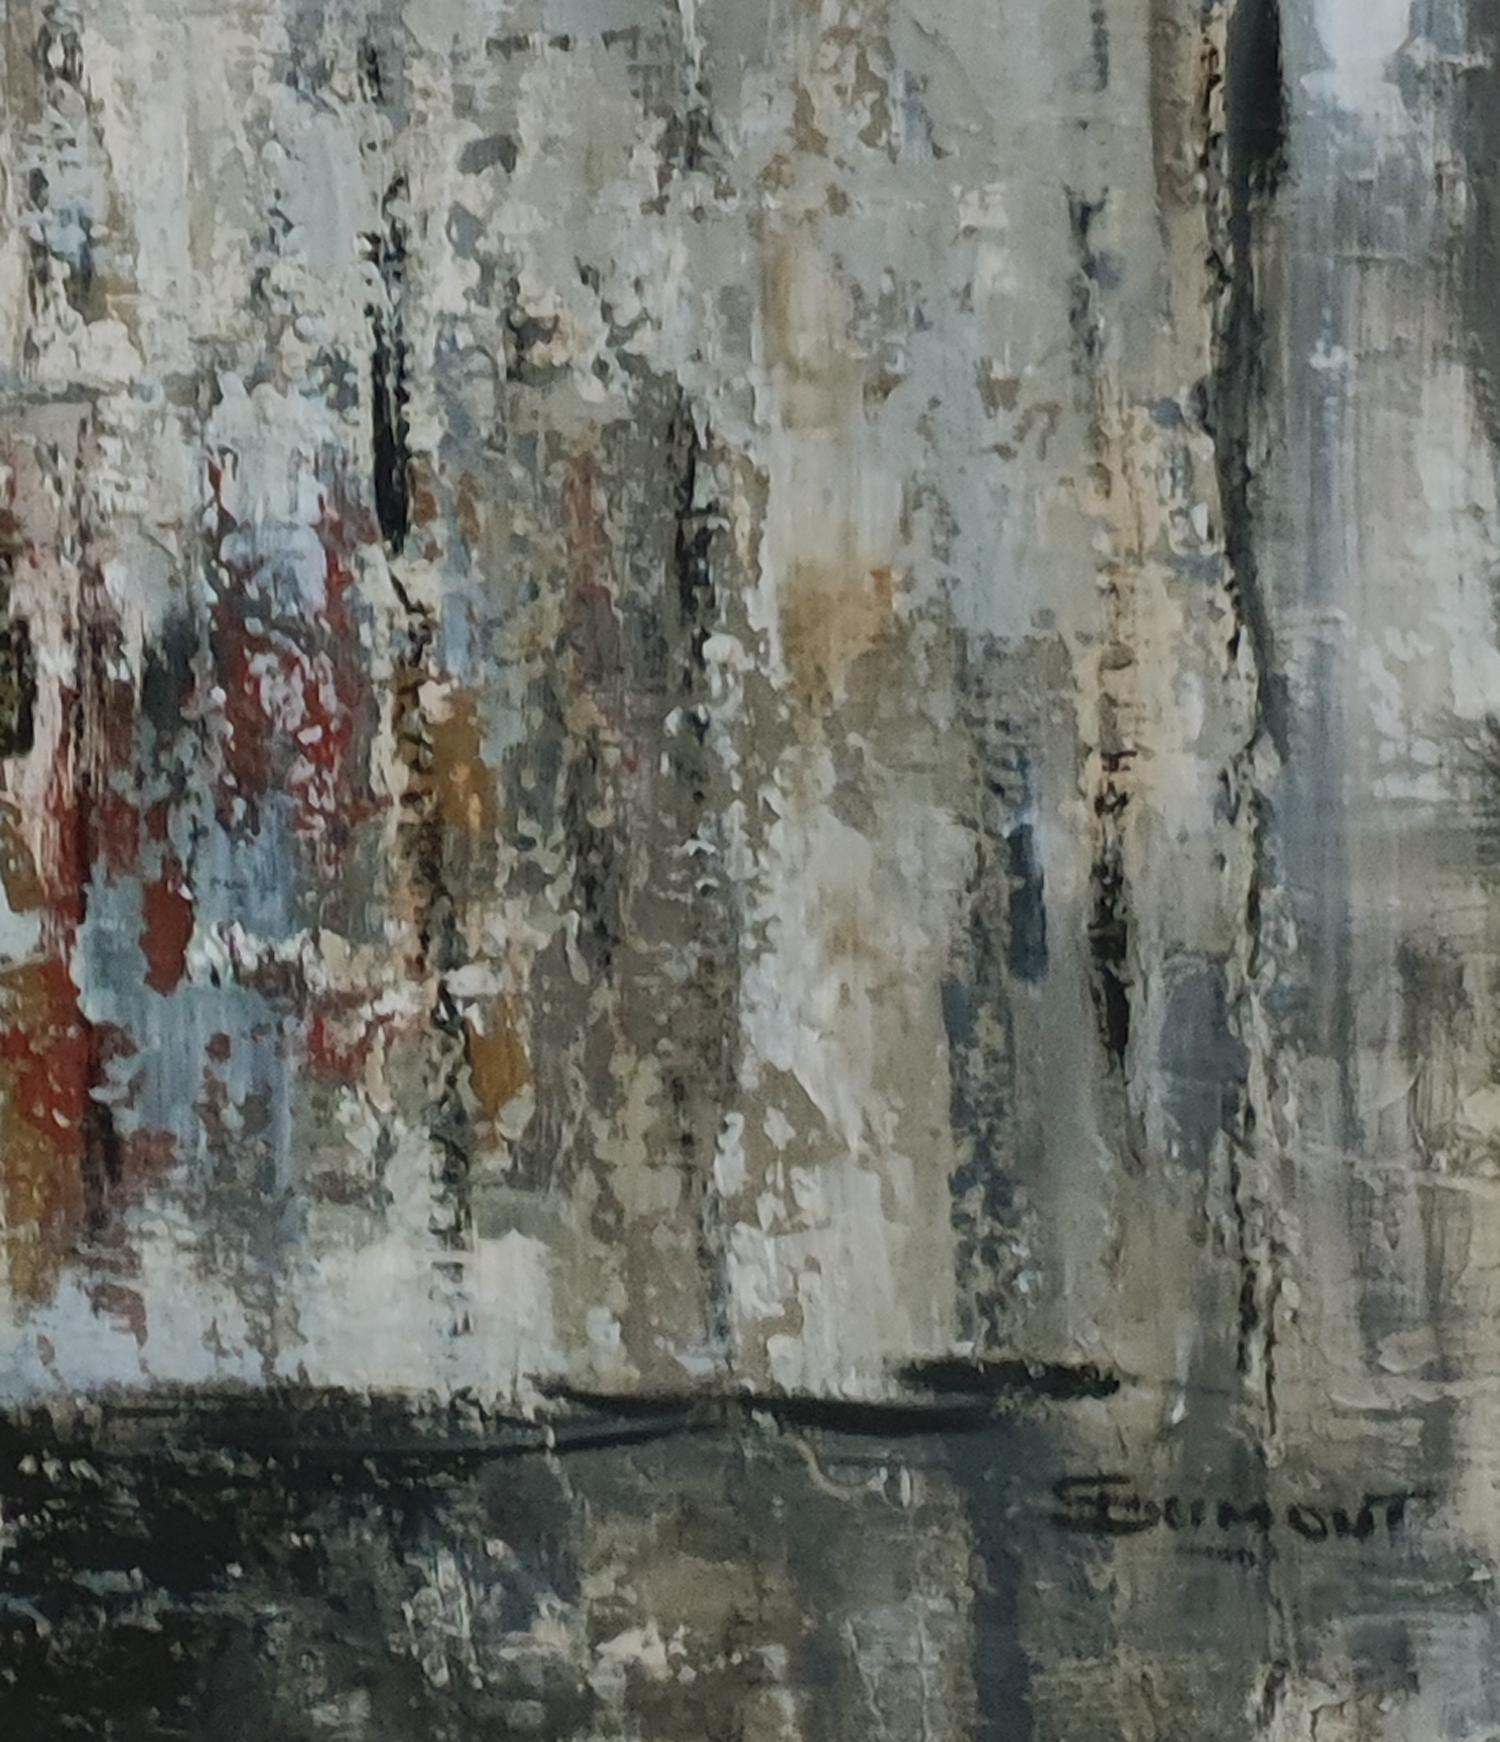 abstract painting having as starting subject an old painted door. The variations of black, gray and white concentrate all the energy contained in the wood, in the paint which peels off over time. The layers are numerous revealing the underlying